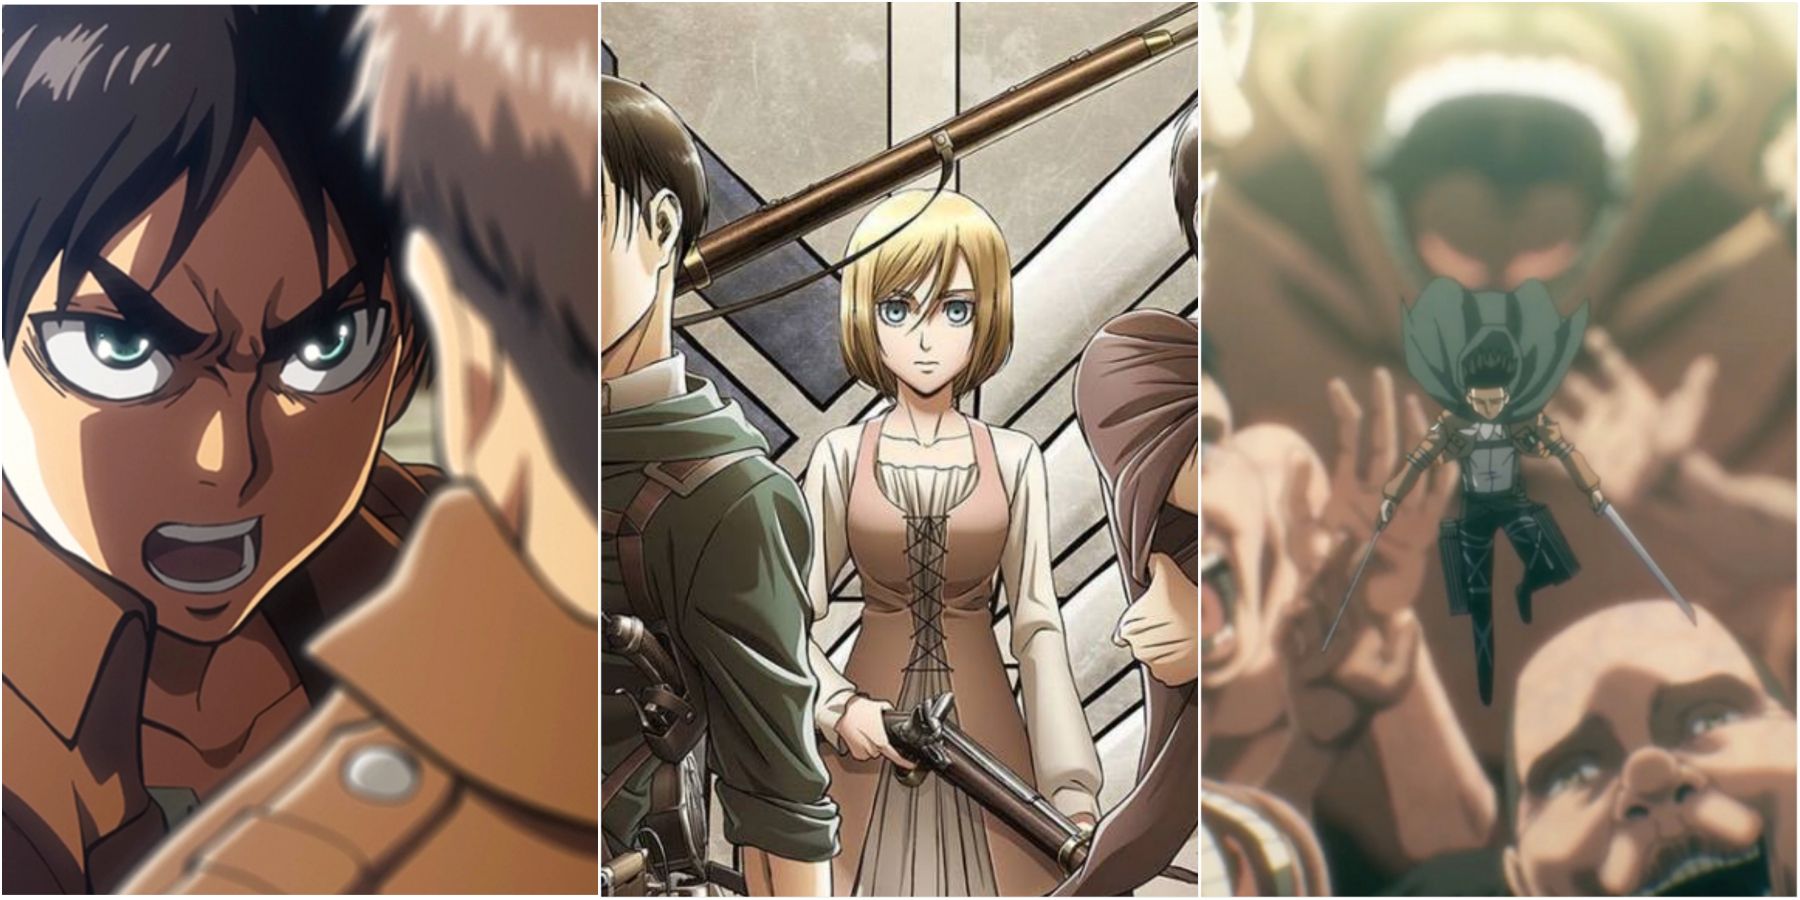 Did Attack on Titan's ending live up to the hype? #attackontitan #anim